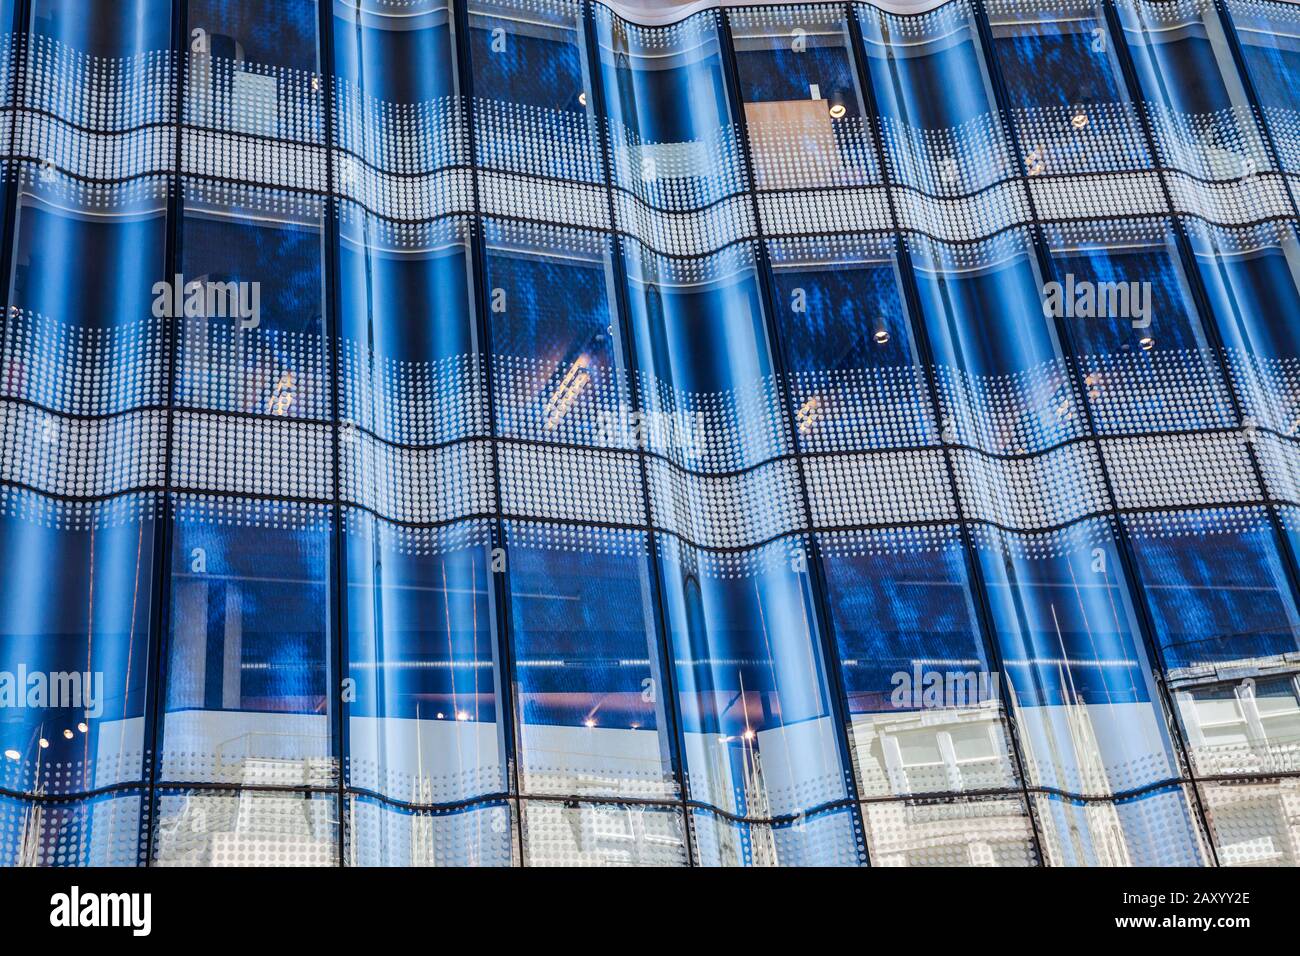 Close-up of a modern office building in London creating an abstract image. Stock Photo